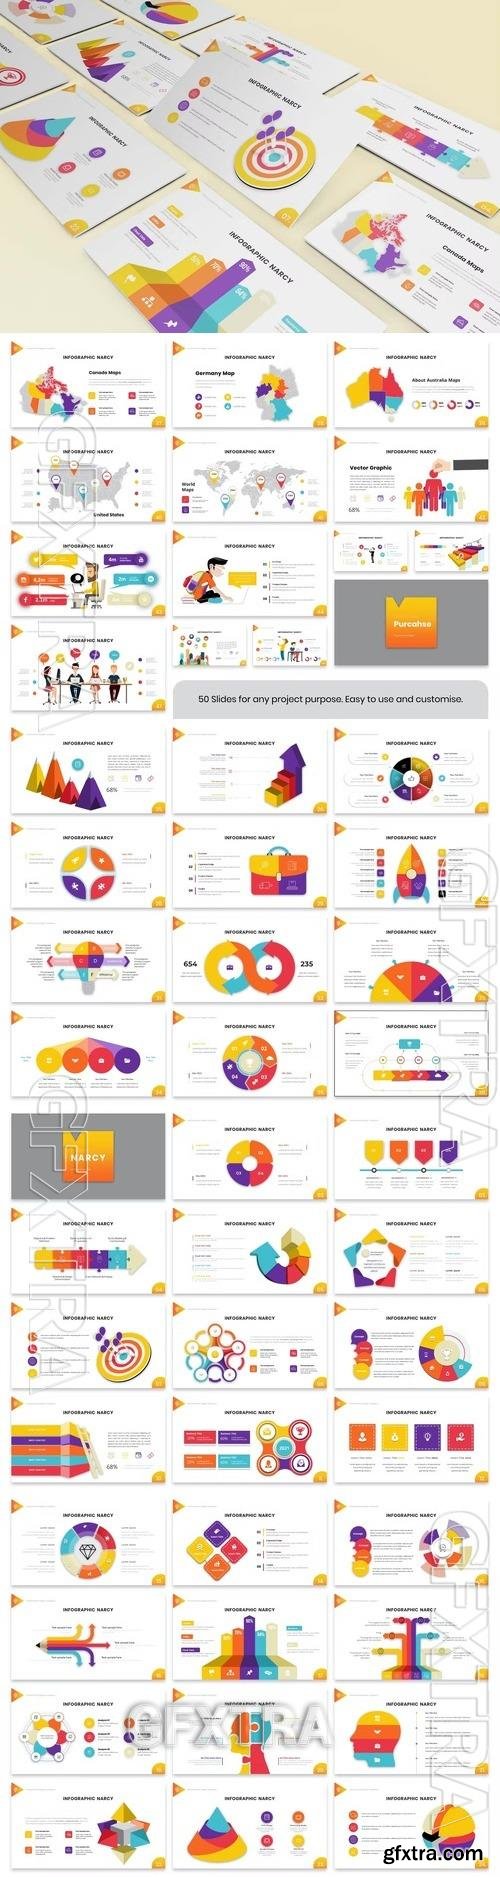 Narcy Infographic Presentation PowerPoint Template B6UCRQH